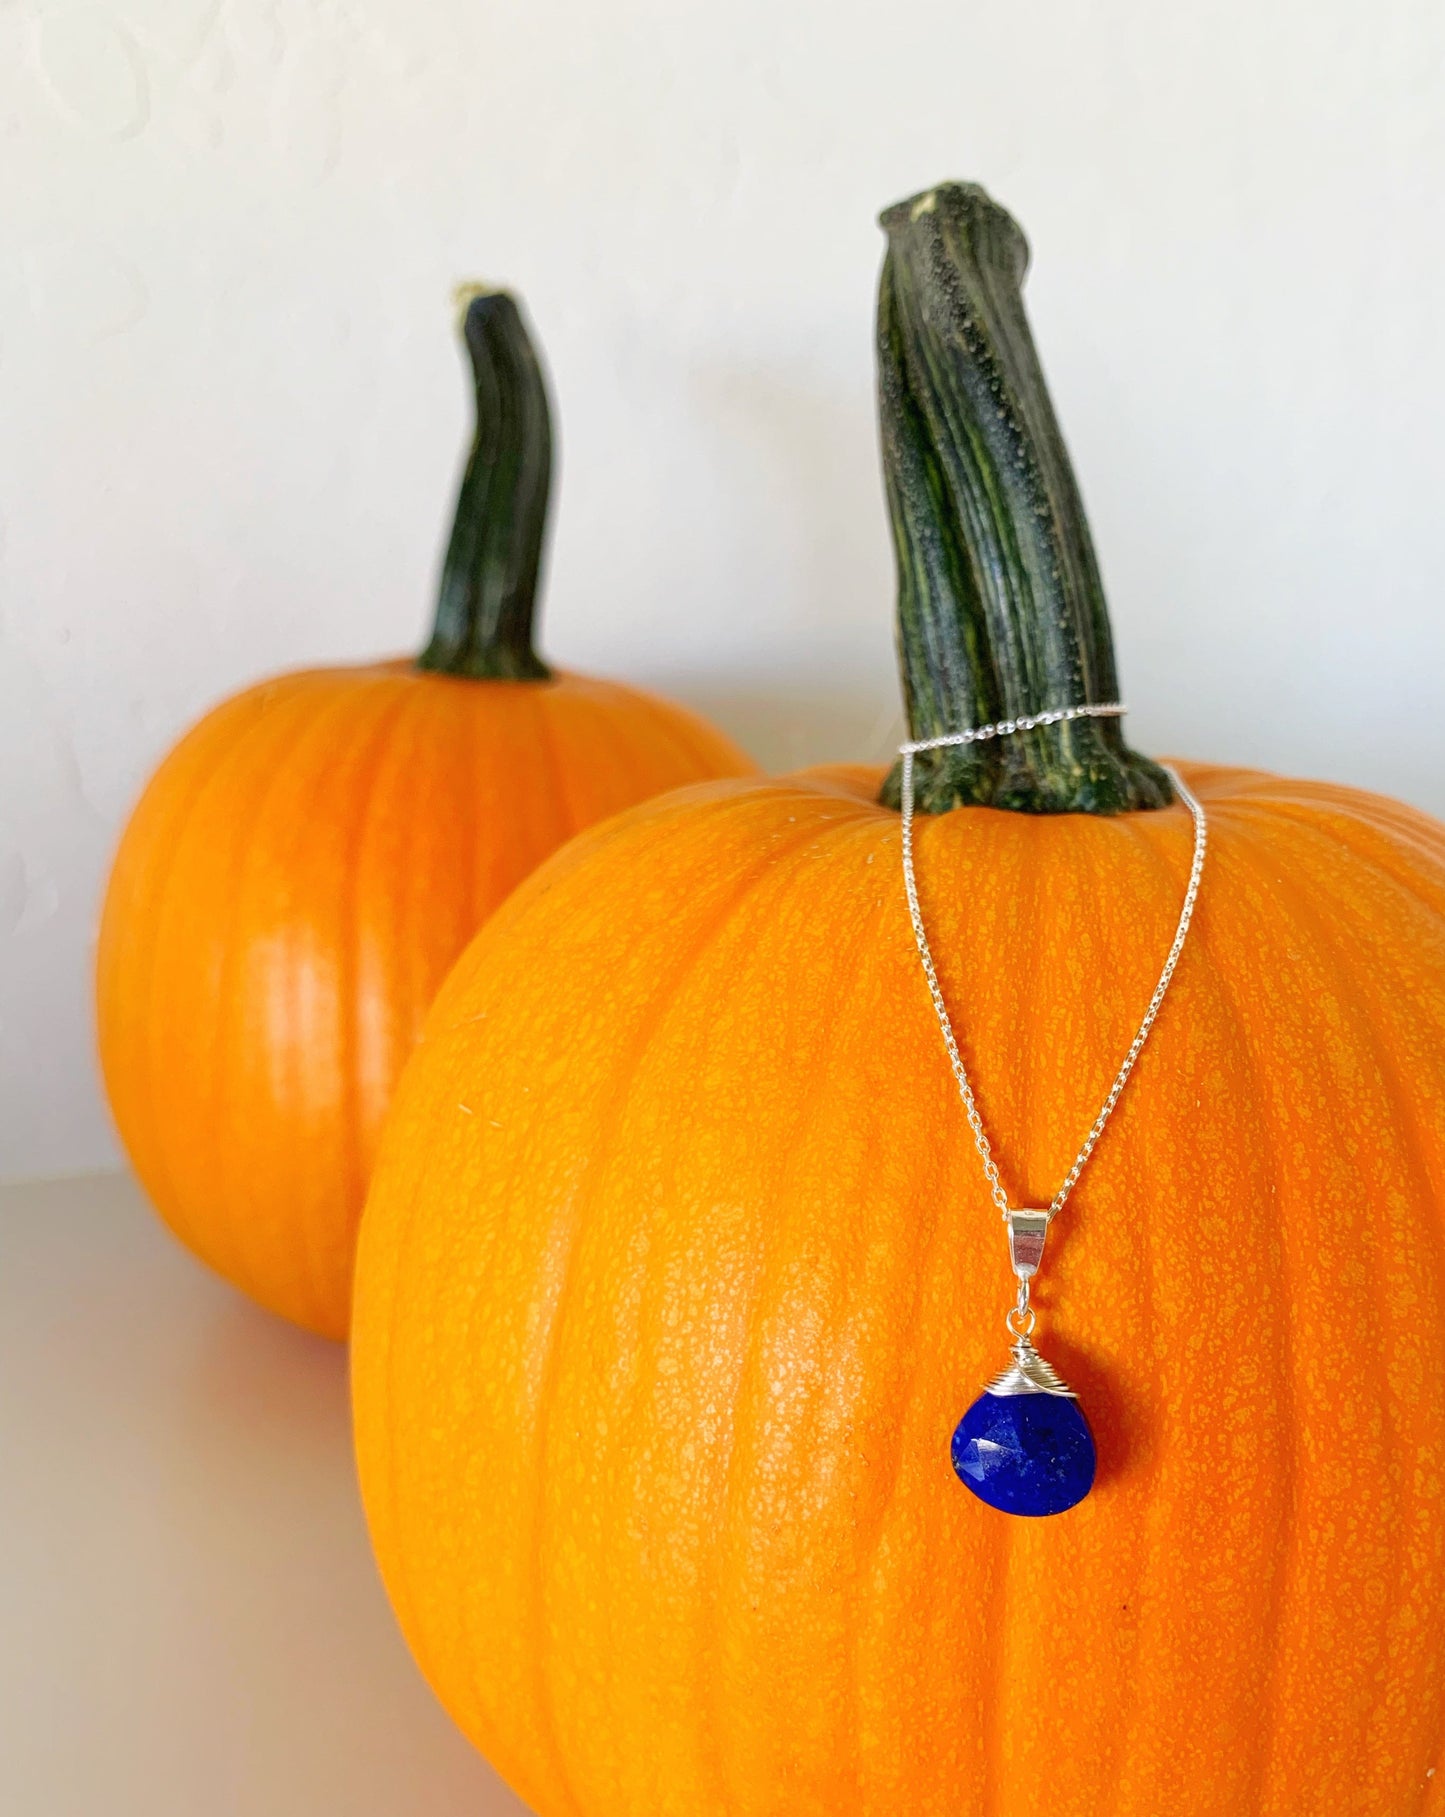 neptune necklace by mermaids and madeleines is a blue lapis faceted briolette wrapped with sterling silver on a sterling chain. this necklace is dangled off of a small pumpkin setting on a white surface